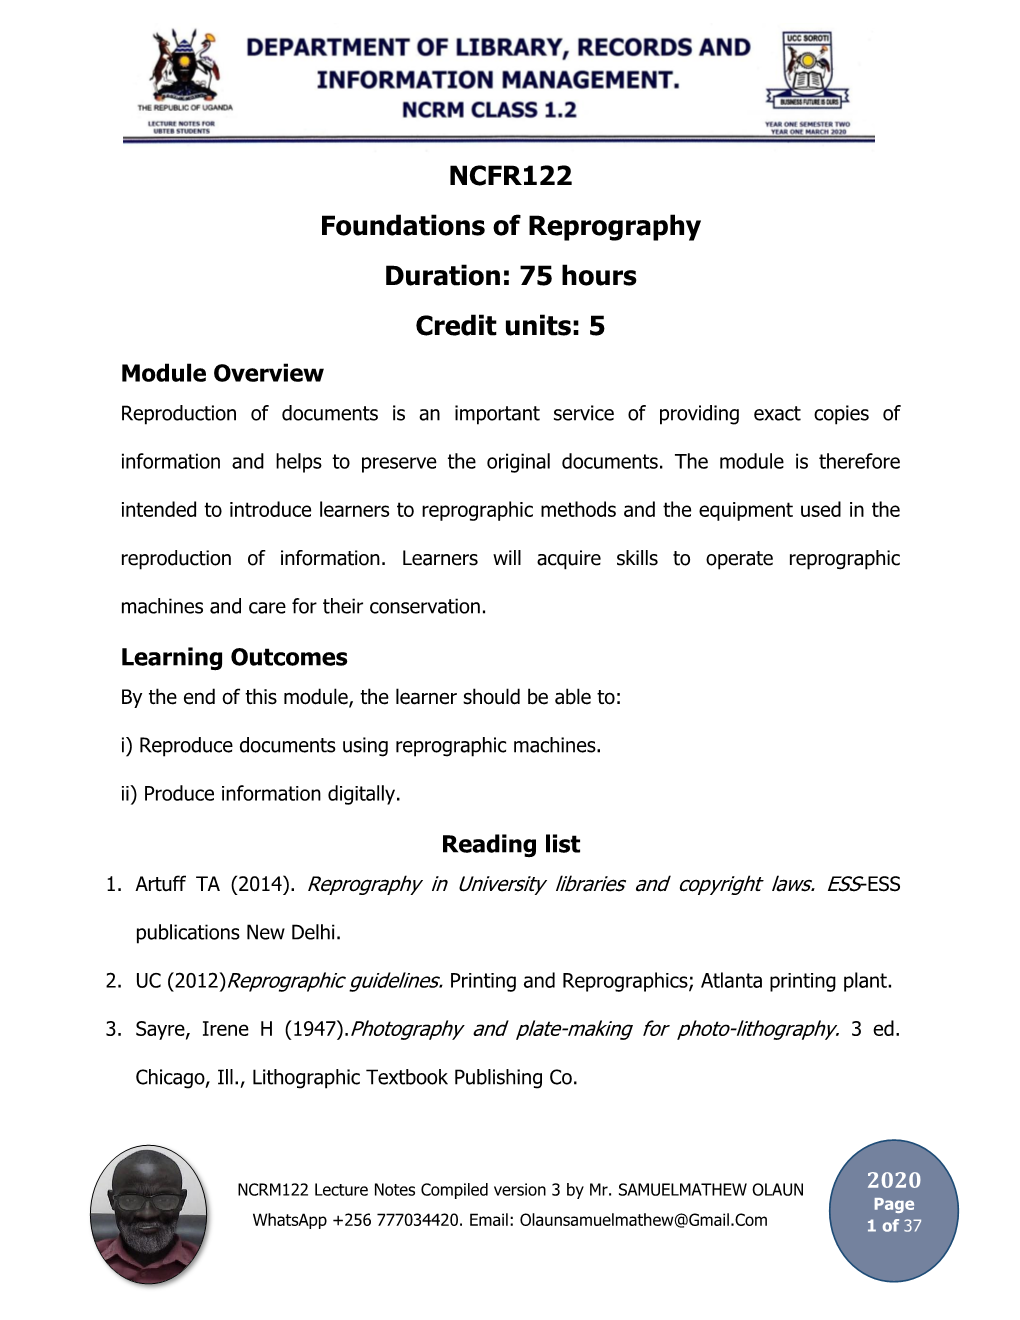 NCFR122 Foundations of Reprography Duration: 75 Hours Credit Units: 5 Module Overview Reproduction of Documents Is an Important Service of Providing Exact Copies Of